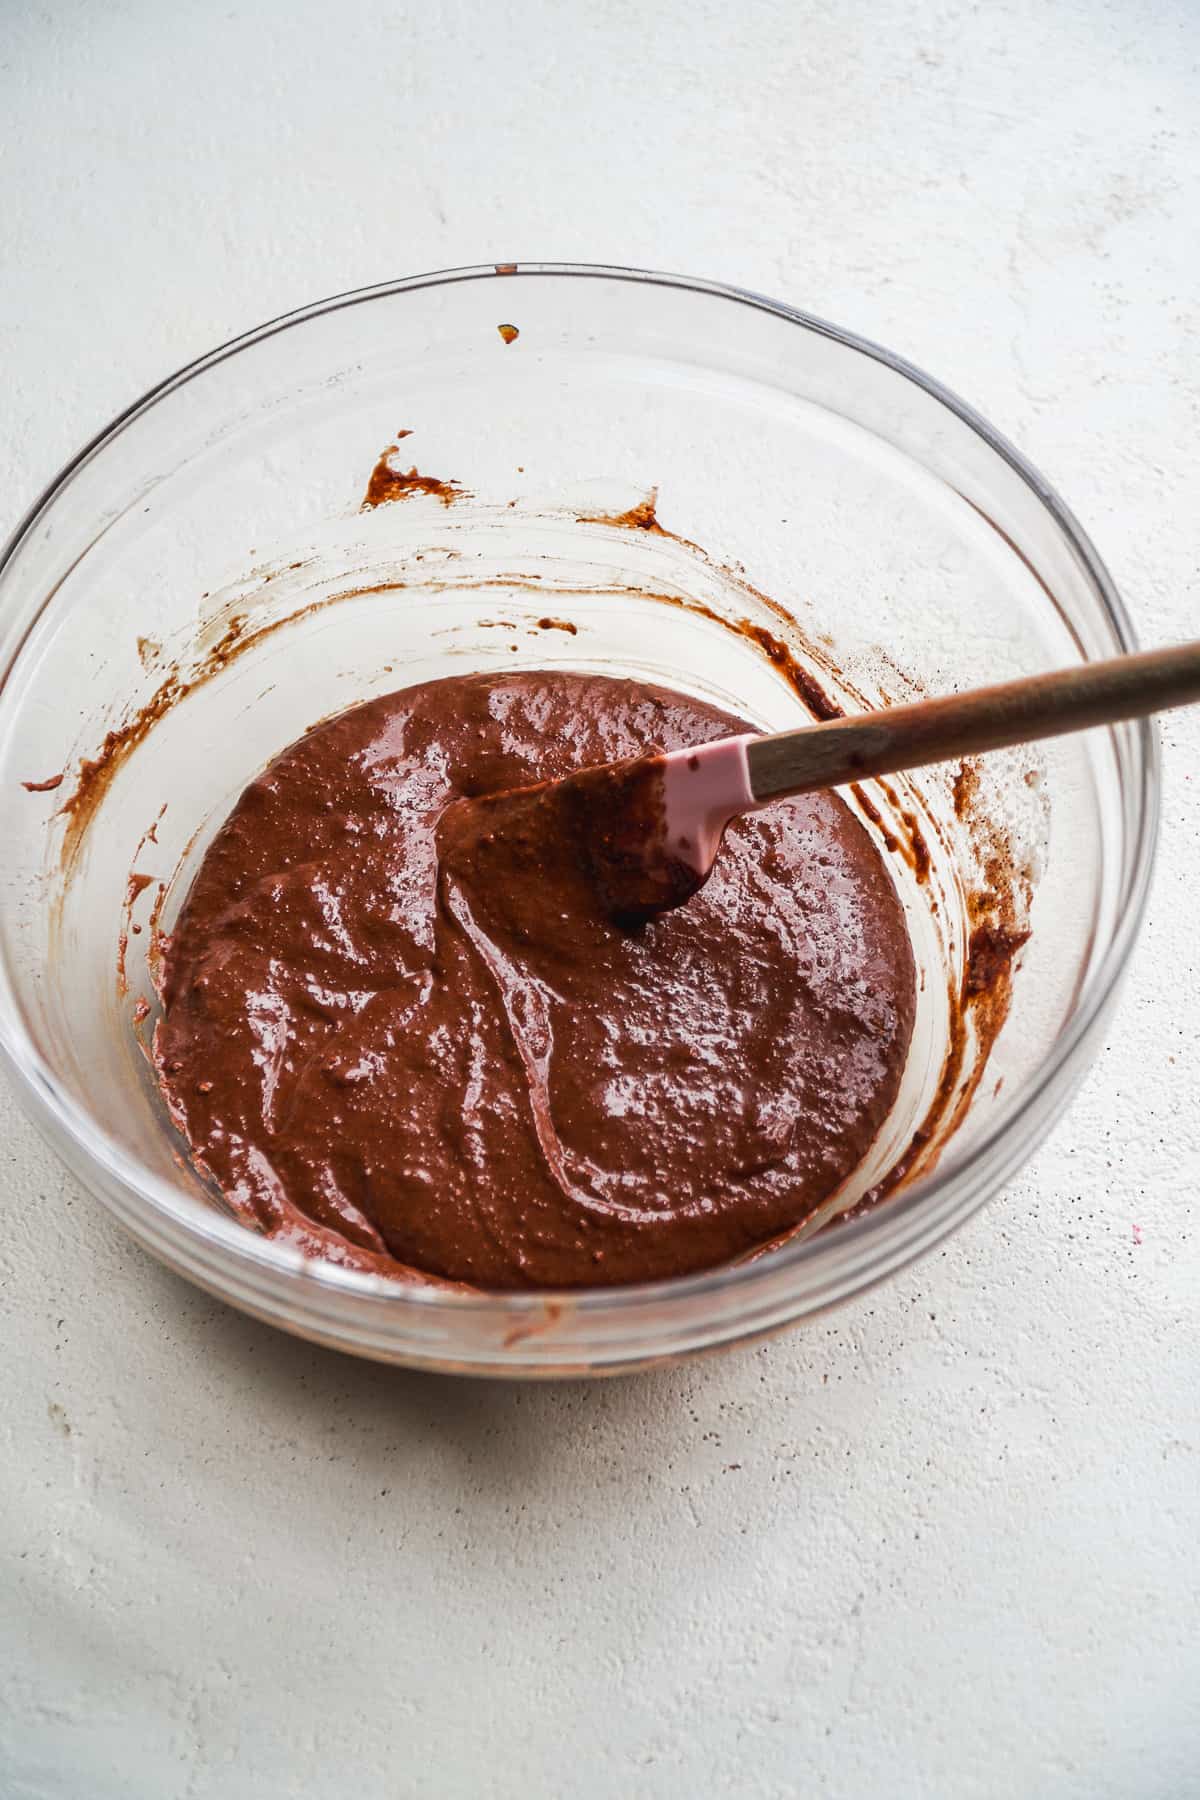 Chocolate cookie batter in a glass bowl.